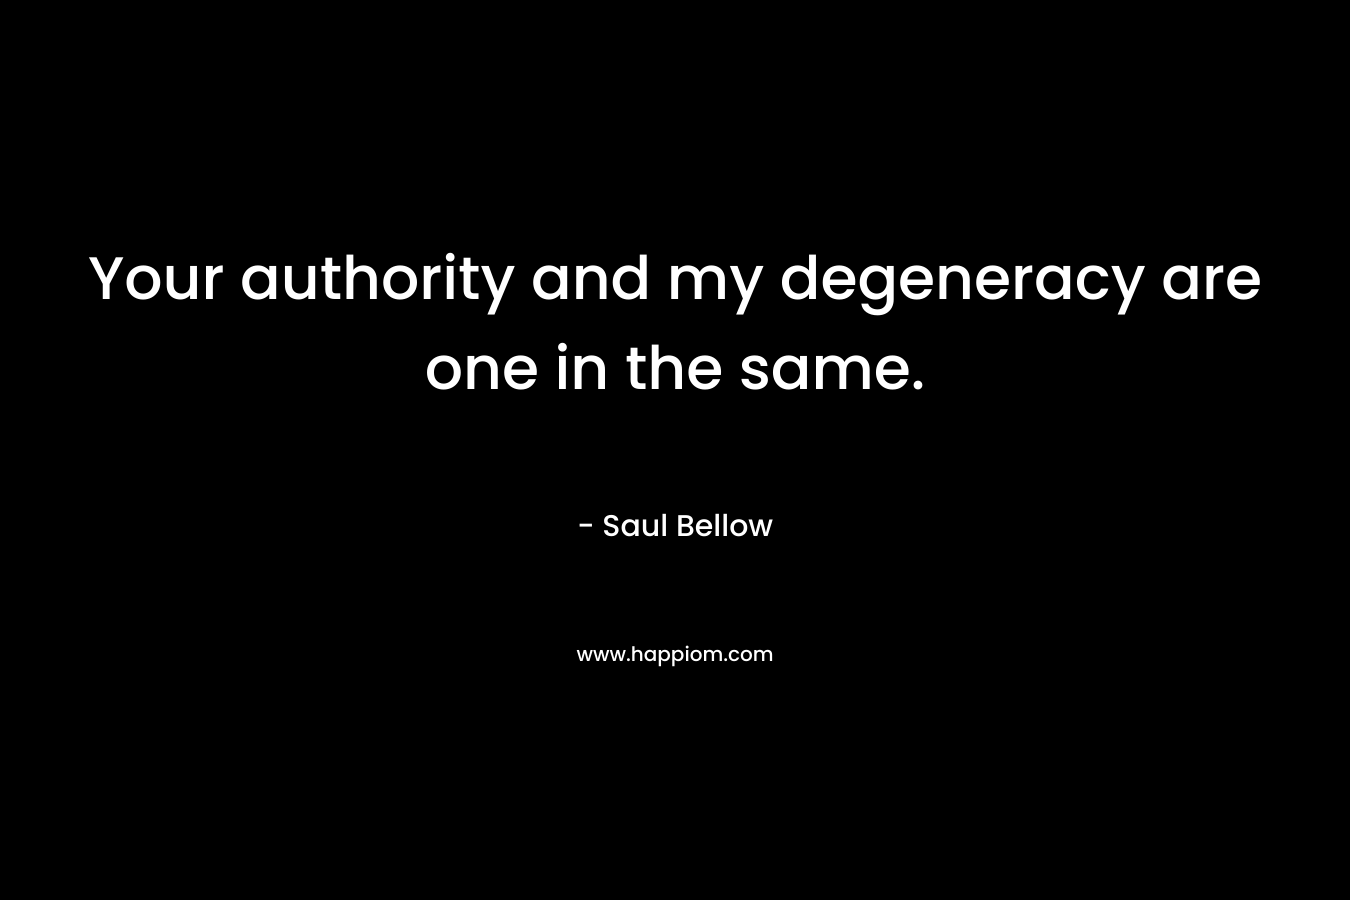 Your authority and my degeneracy are one in the same.